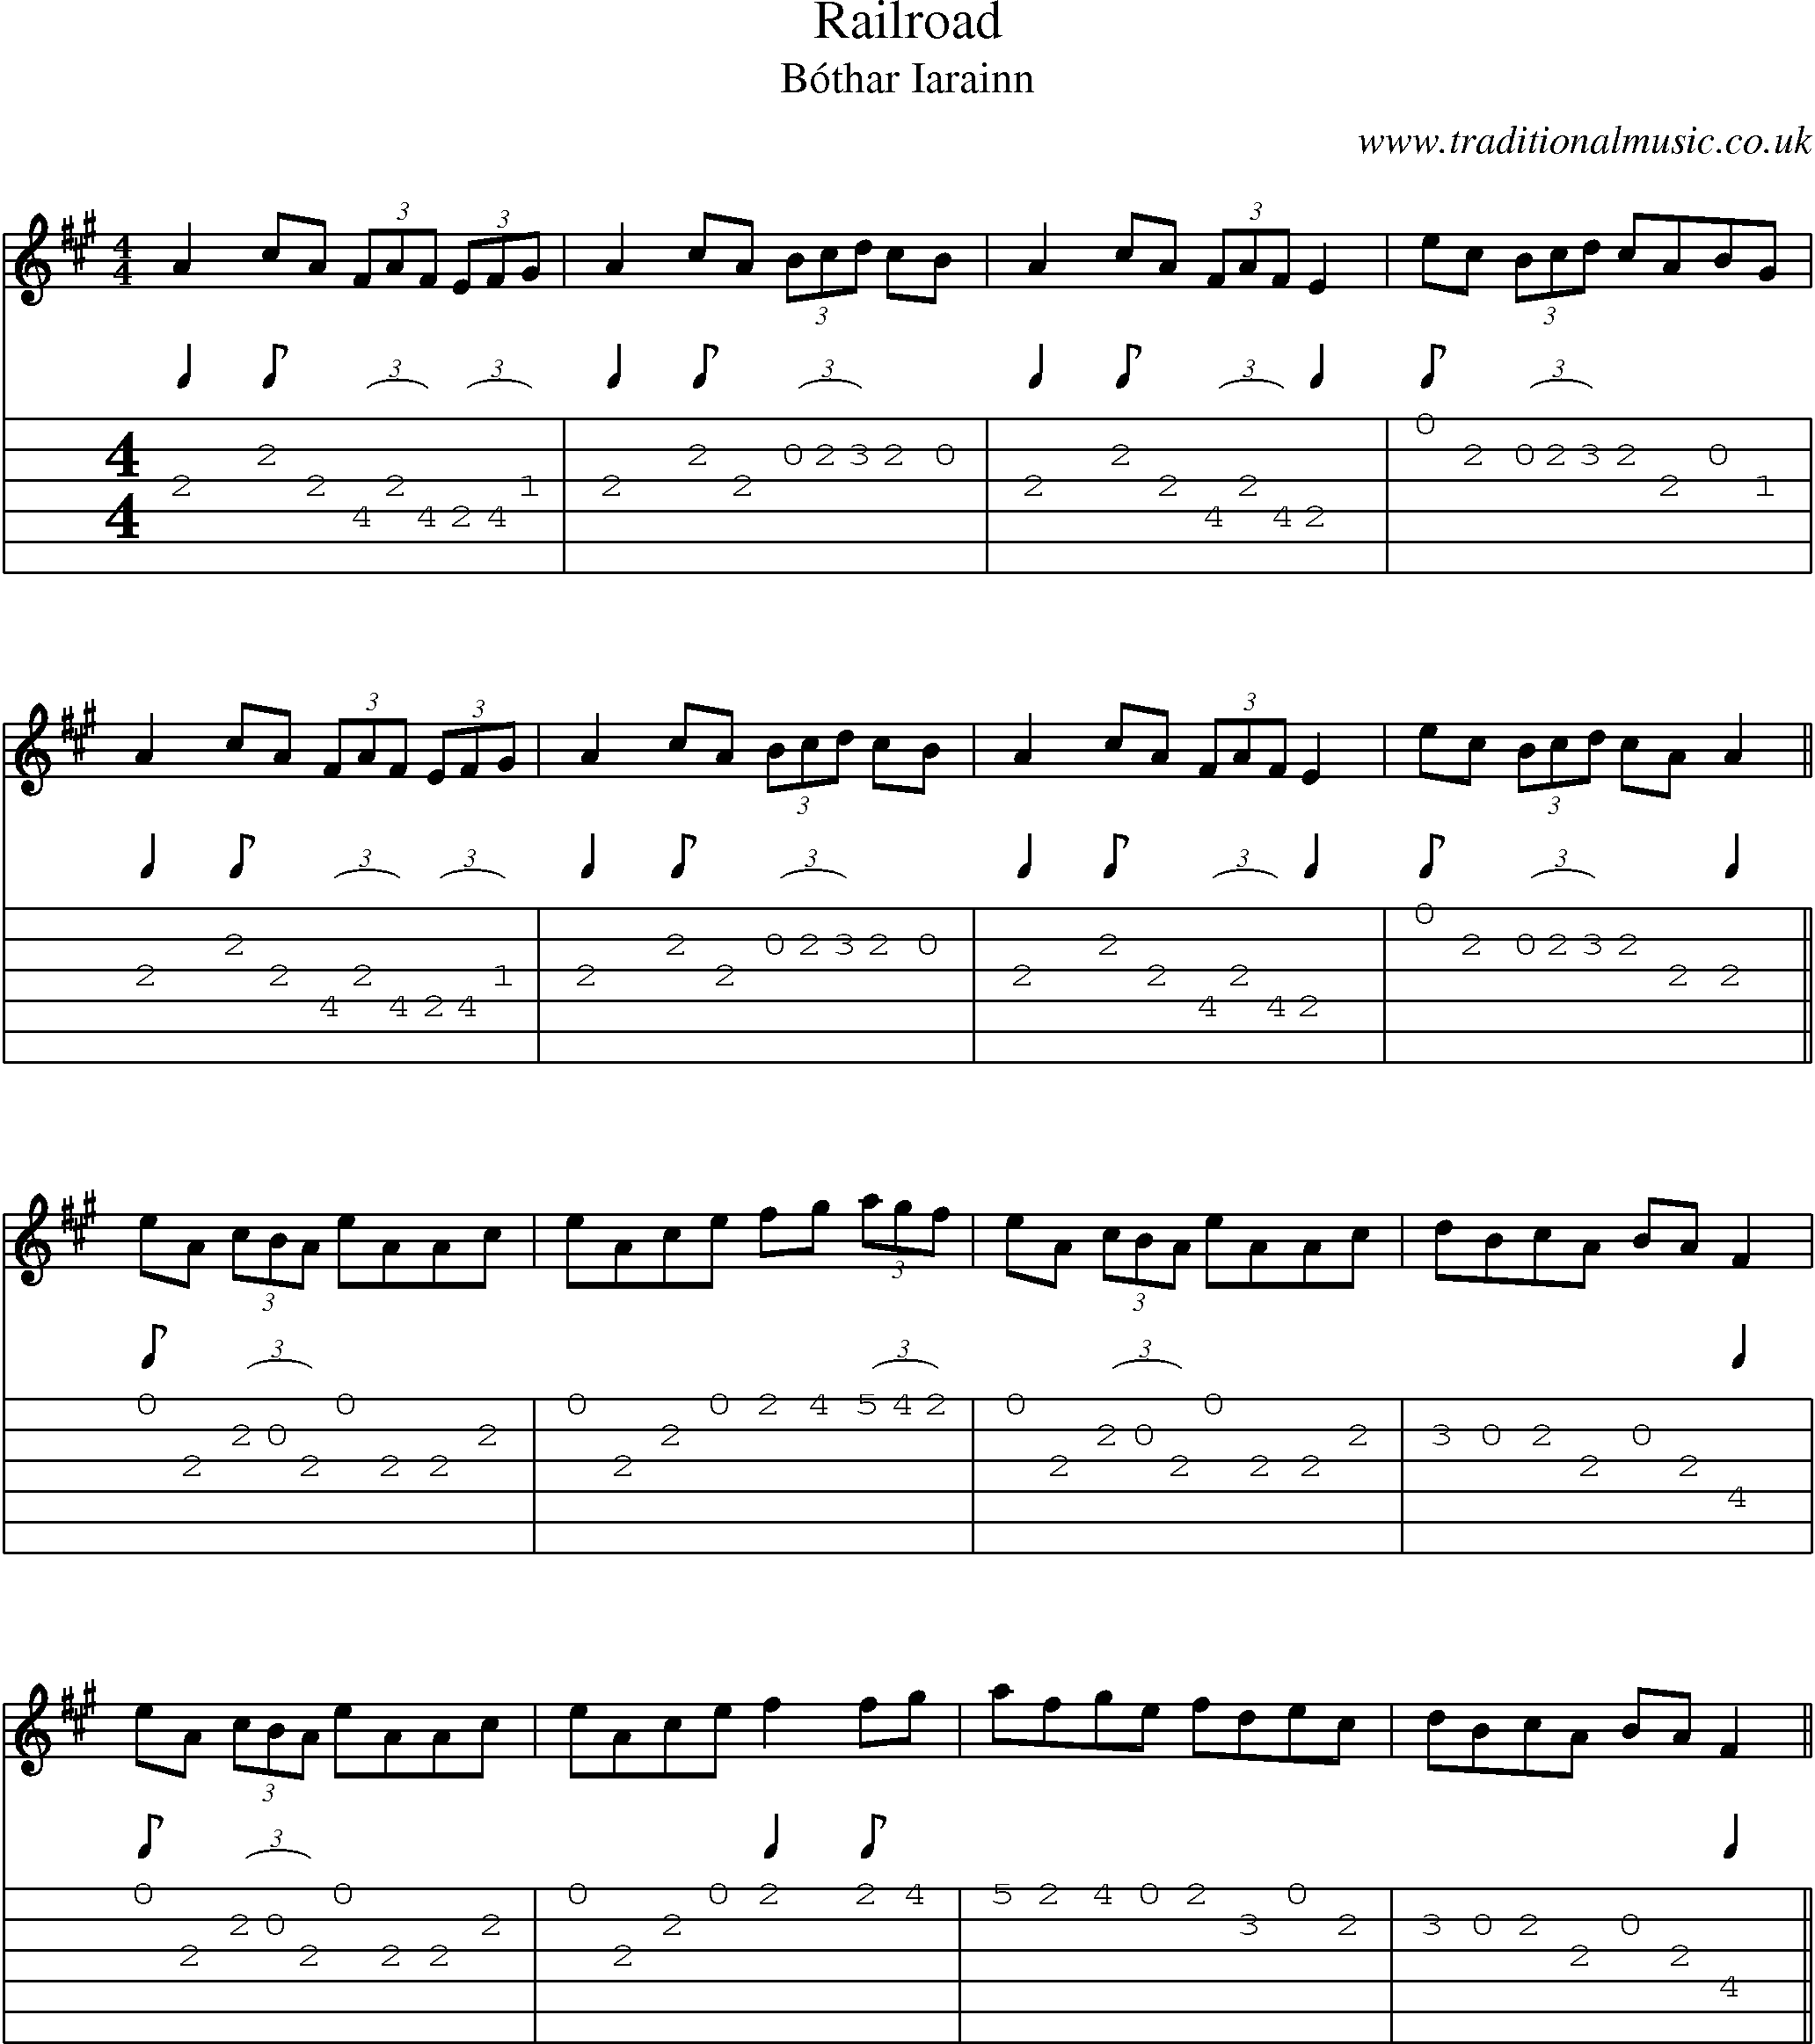 Music Score and Guitar Tabs for Railroad